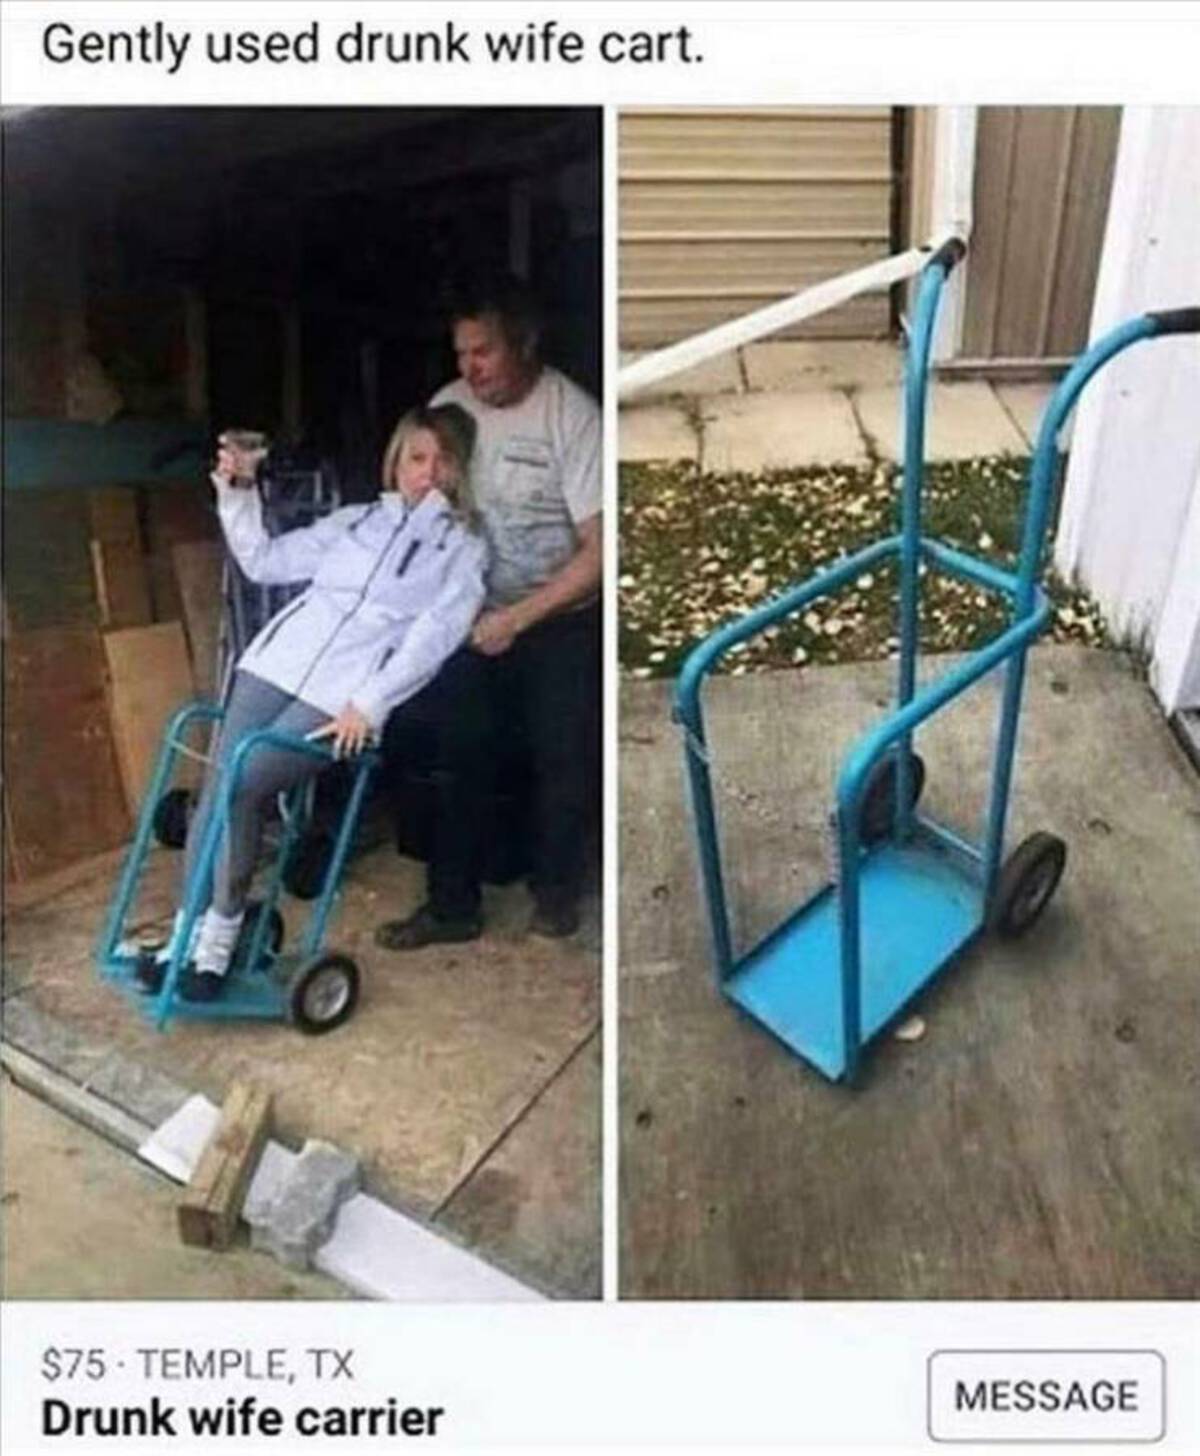 drunk wife carrier - Gently used drunk wife cart. $75 Temple, Tx Drunk wife carrier Message